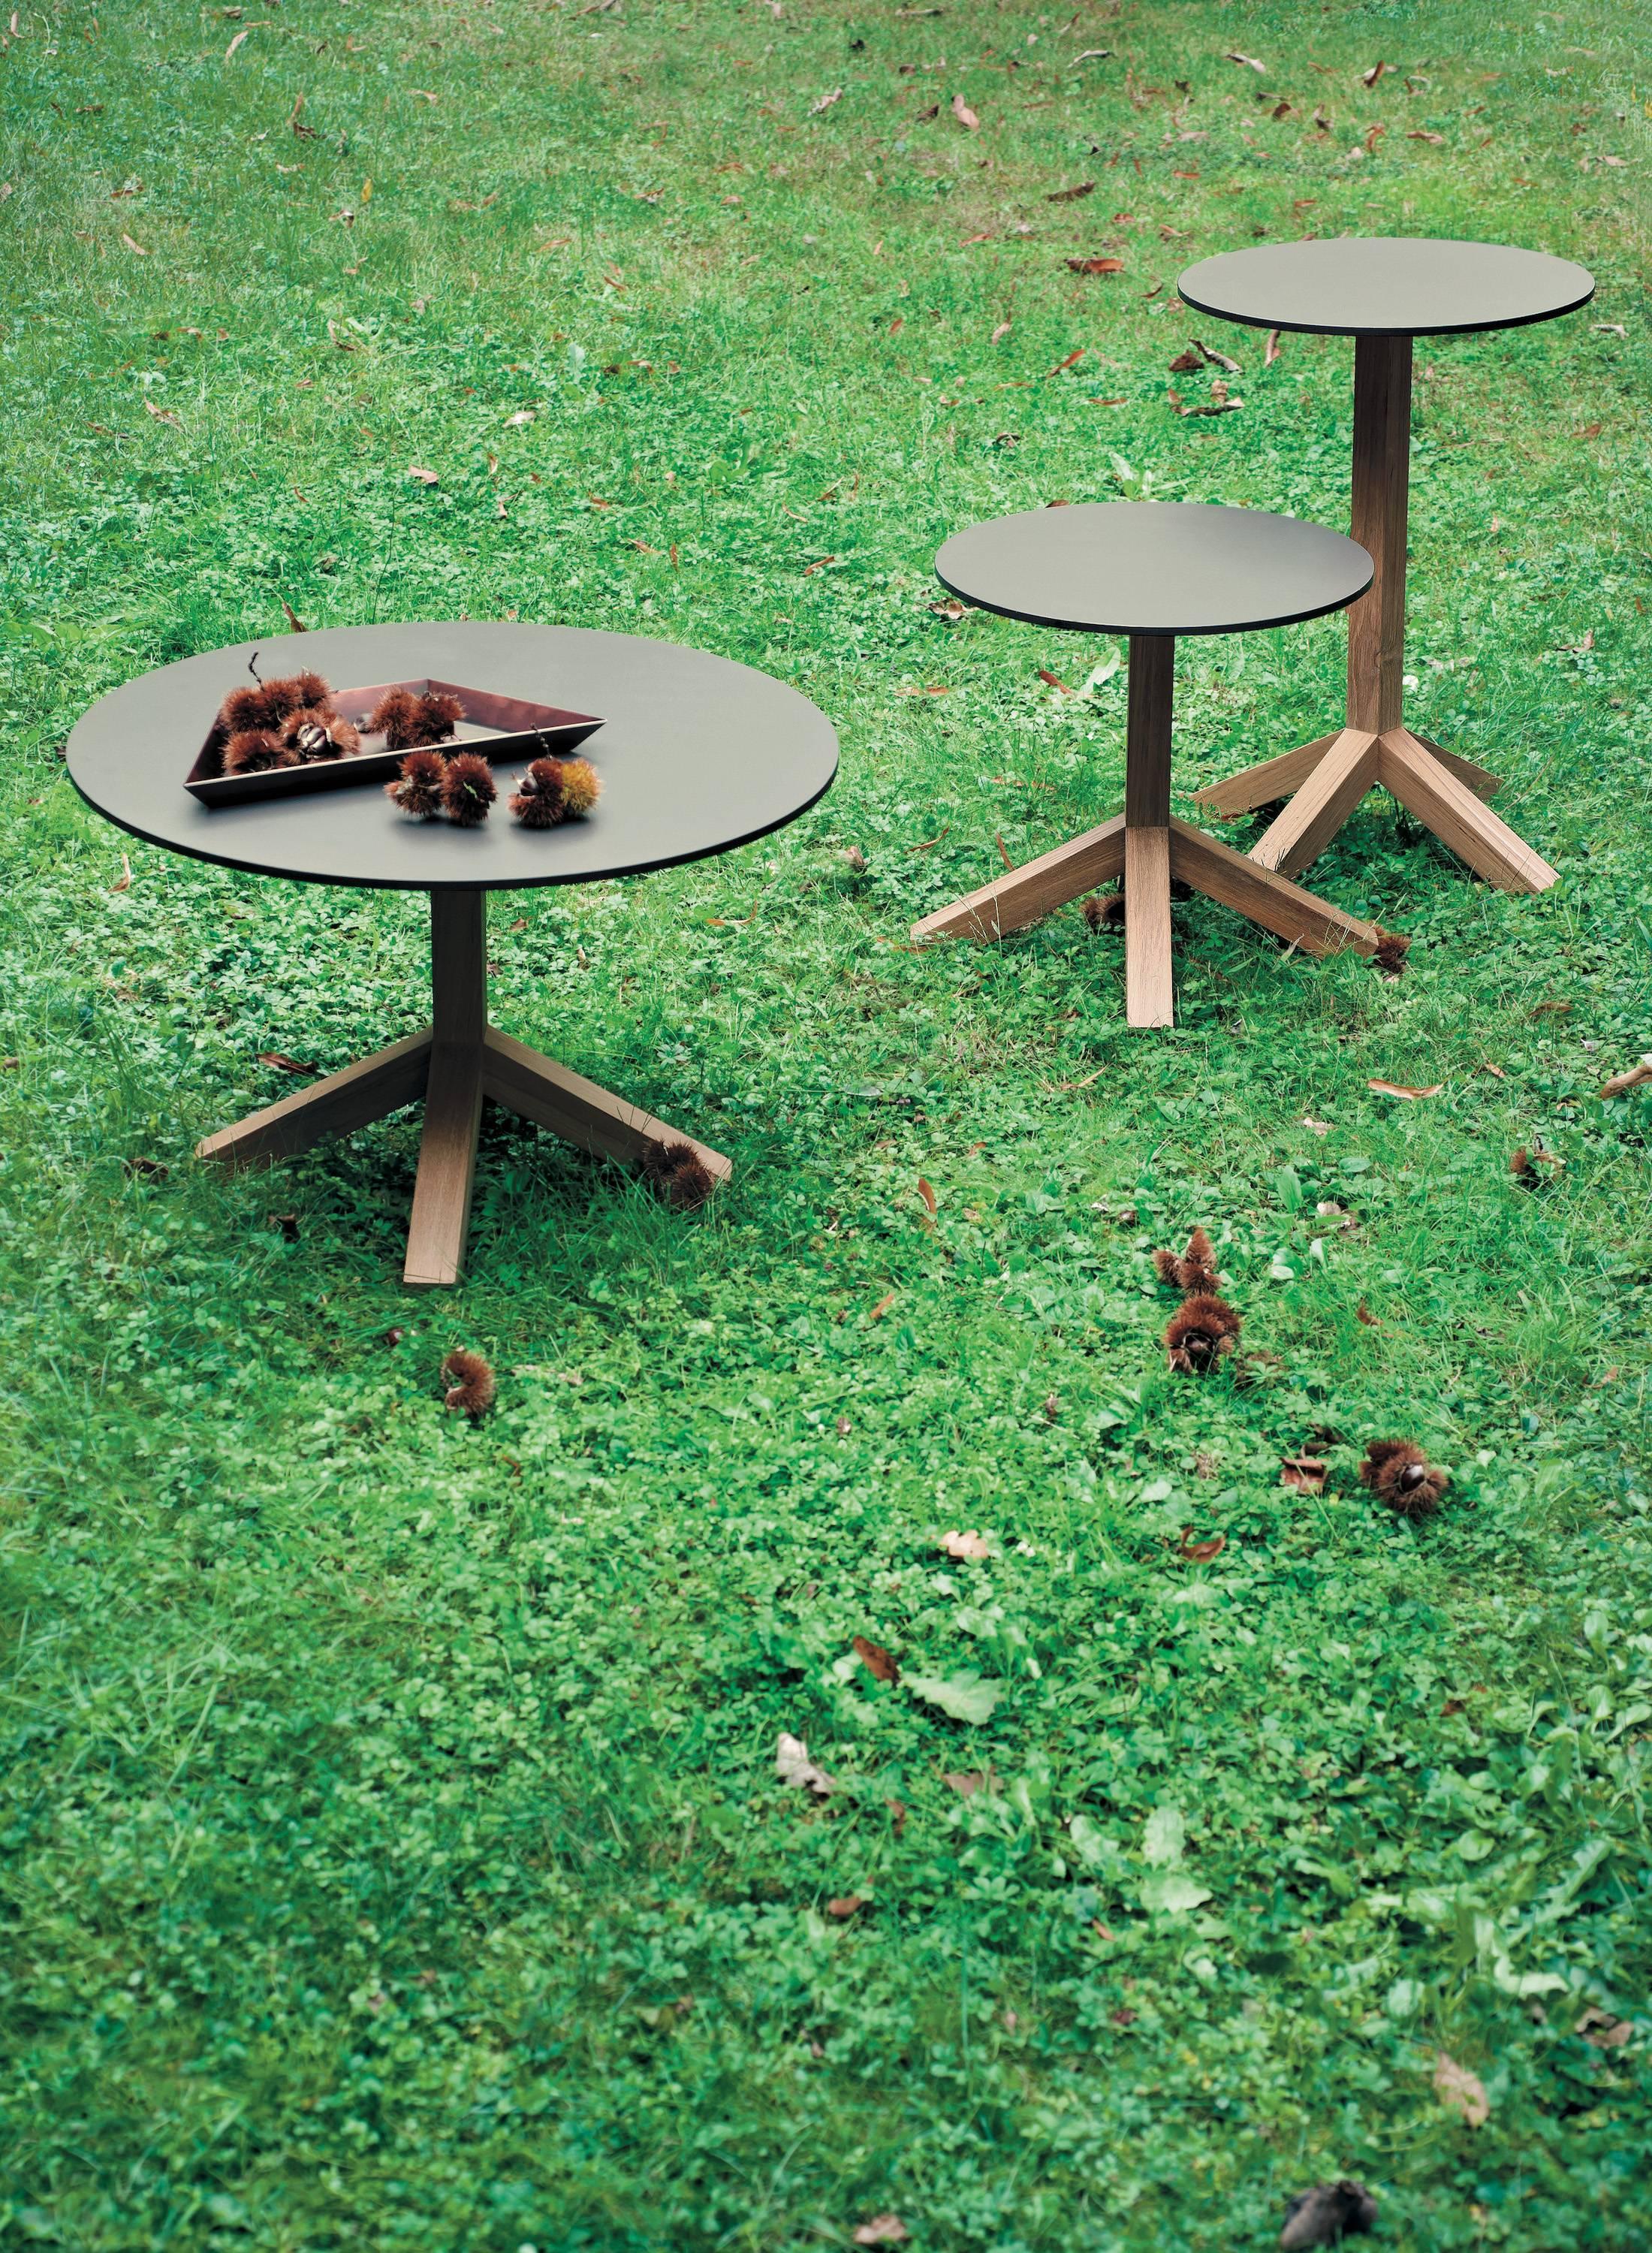 Simple but instantly recognizable, root service tables furnish with class and discretion both the garden, the terrace and every room inside the house.
A simple and basic product, but which seems almost impossible to do without for its versatility